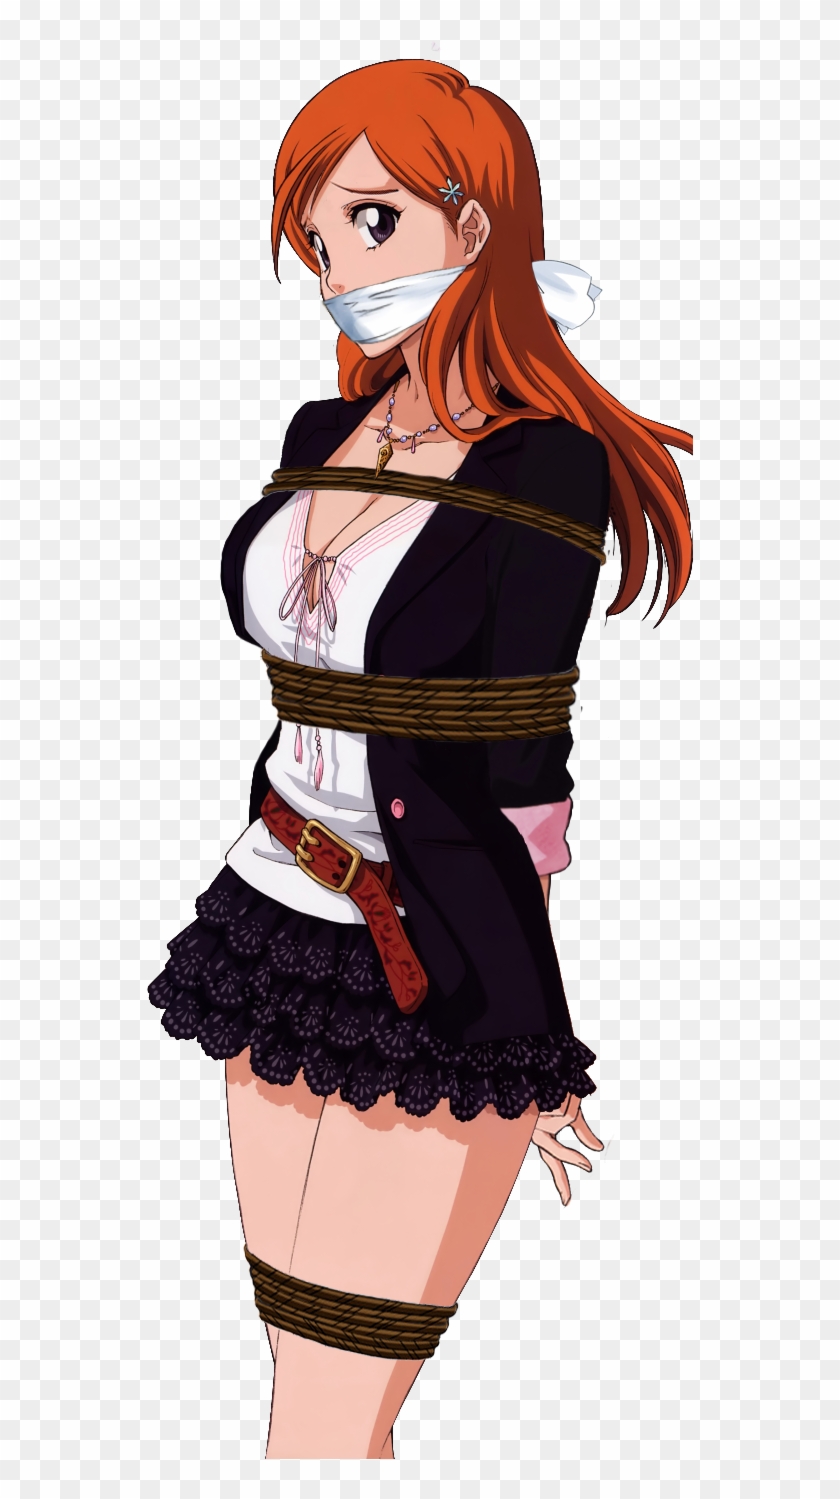 Orihime Inoue From Bleach Tied Up &amp - Inoue Bleach Clipart #4059243